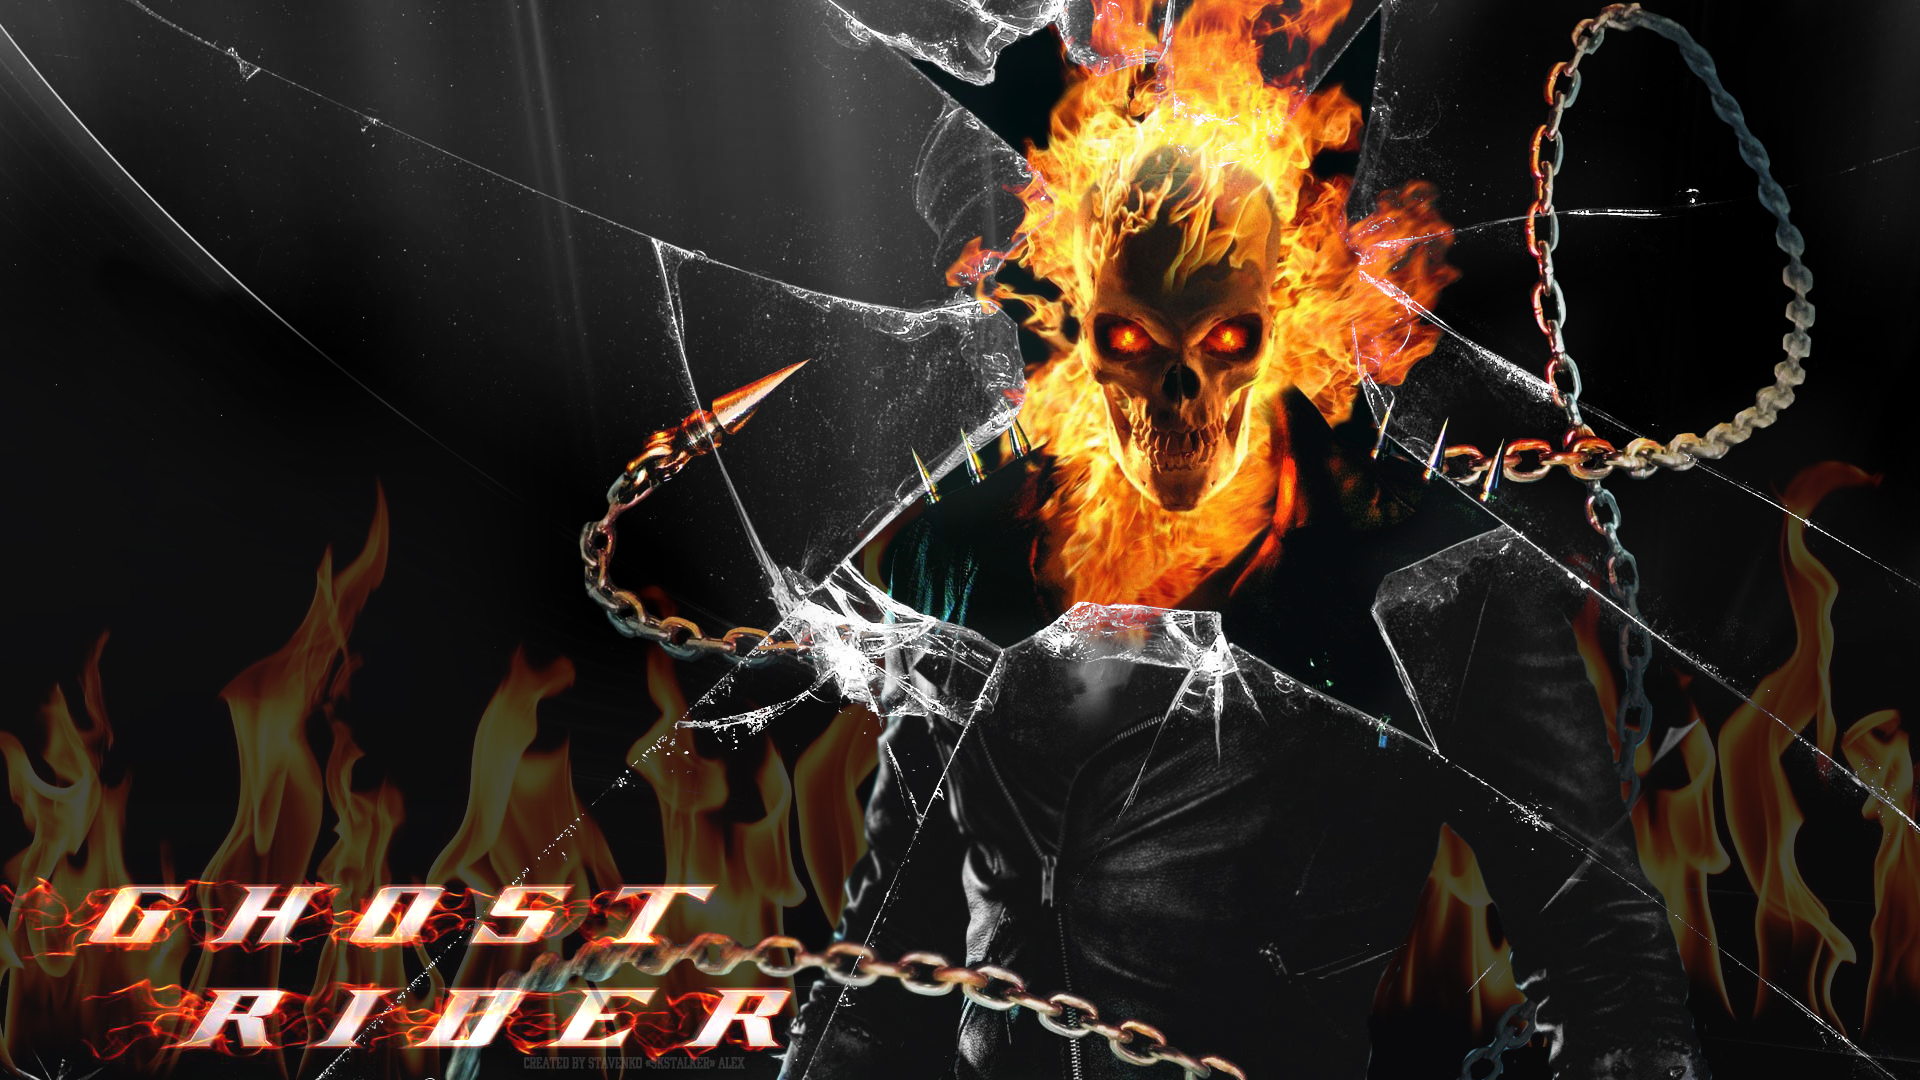 The Ghost Rider Ghost rider